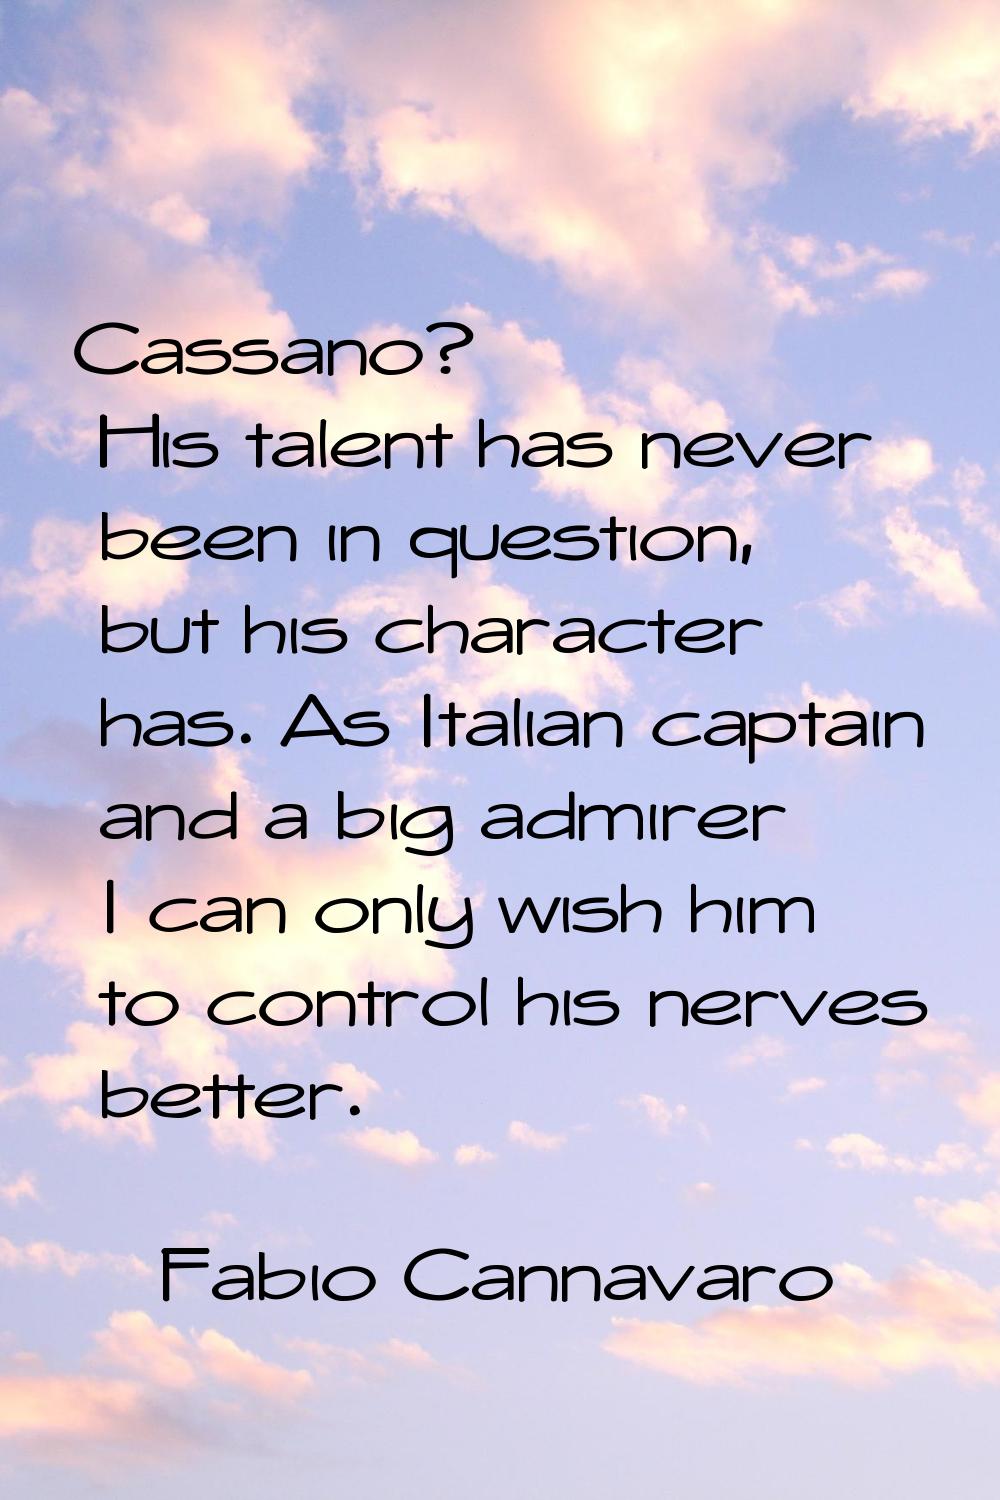 Cassano? His talent has never been in question, but his character has. As Italian captain and a big